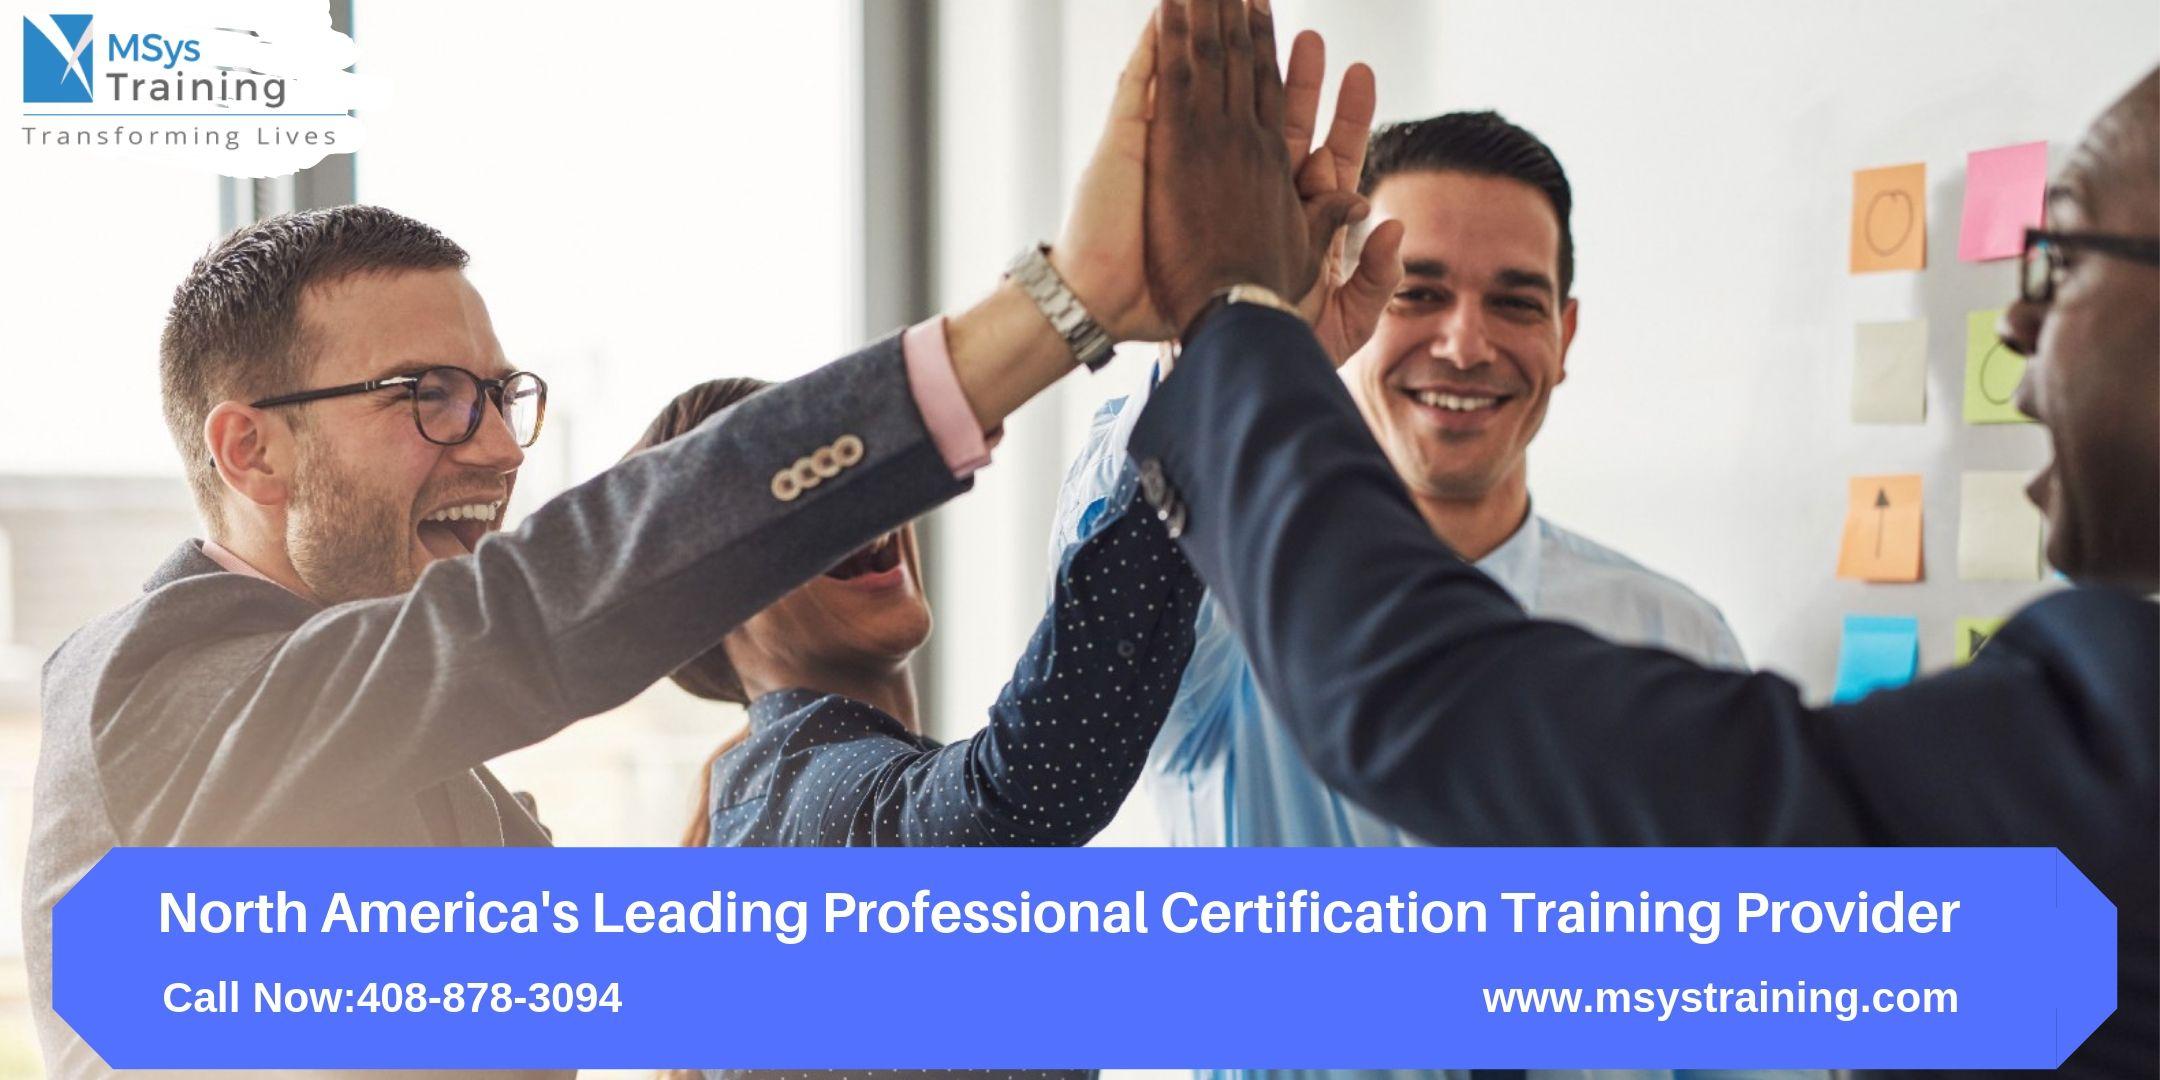 ITIL Foundation Certification Training in Tampa, FL